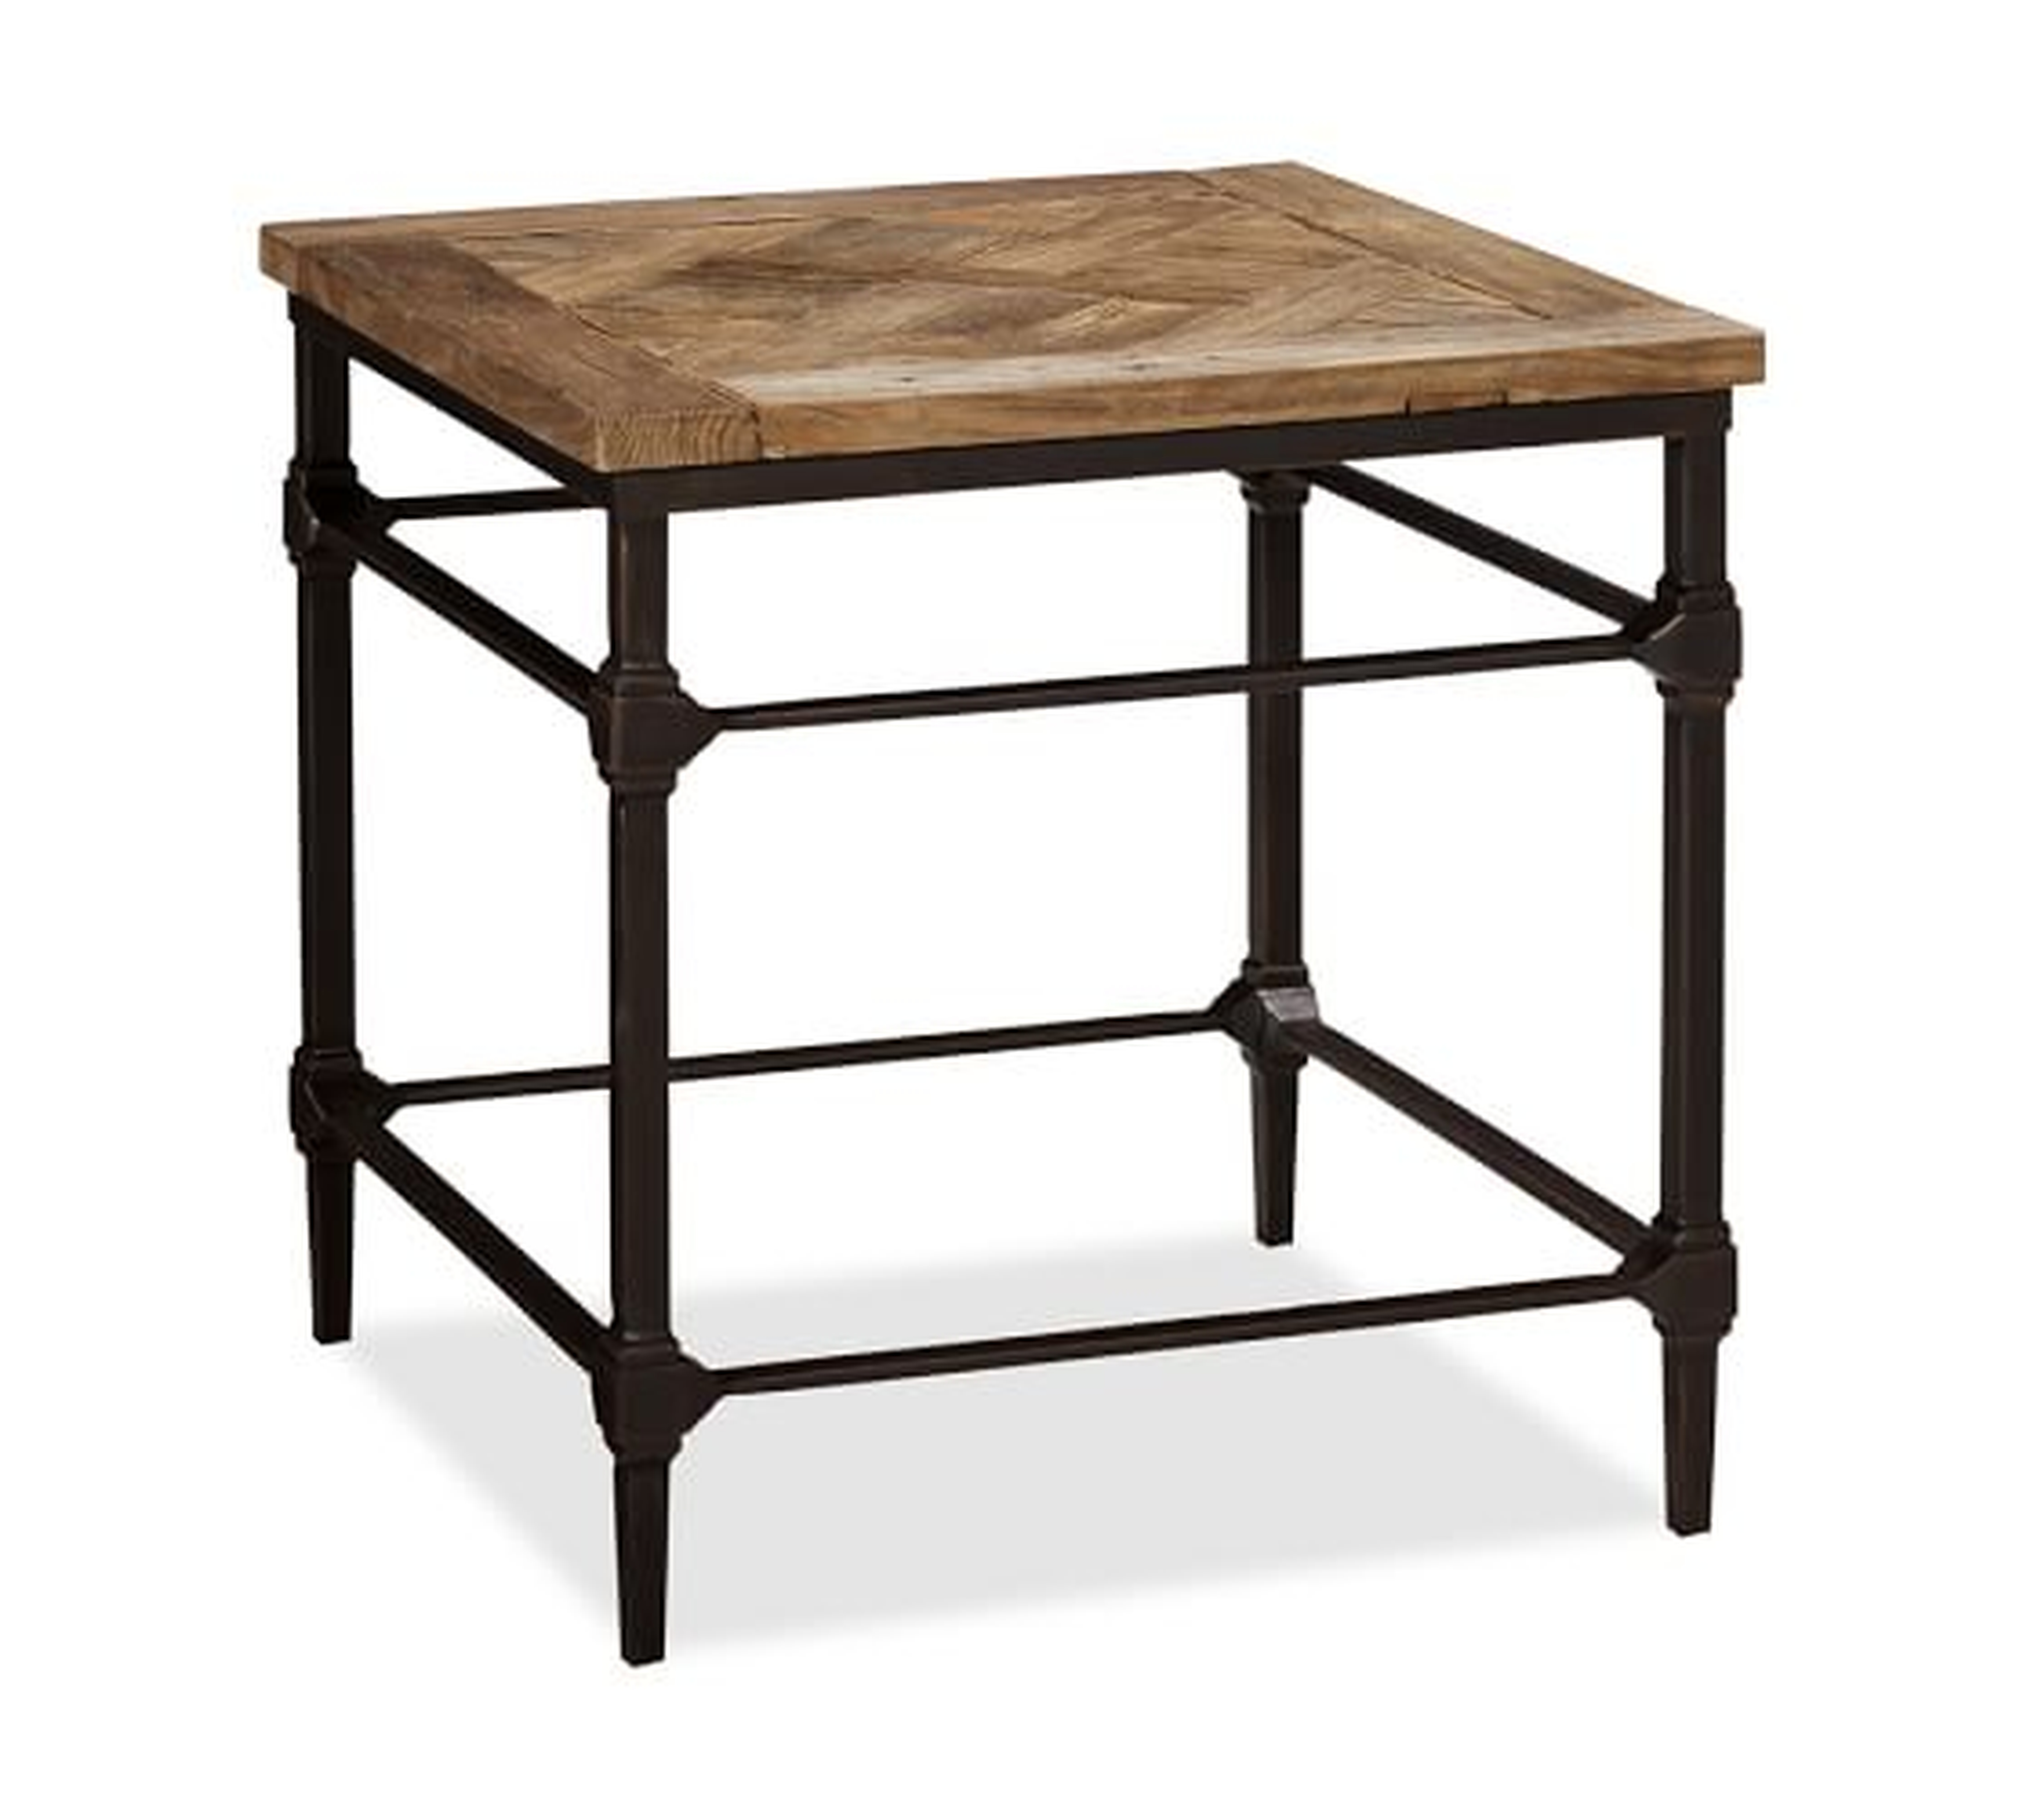 Parquet Reclaimed Wood Side Table - Pottery Barn